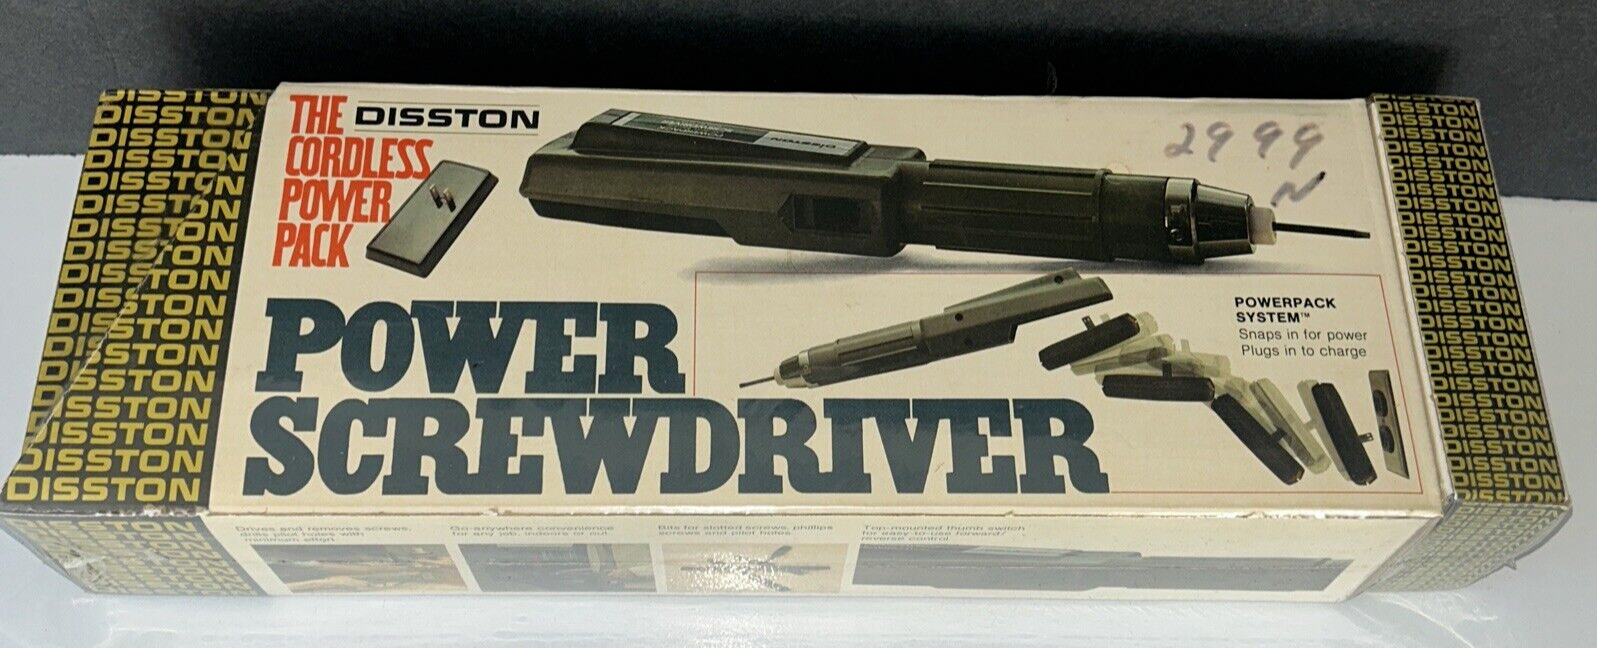 Disston Power Screwdriver - Cordless Power Pack NEW SEALED Original and vintage